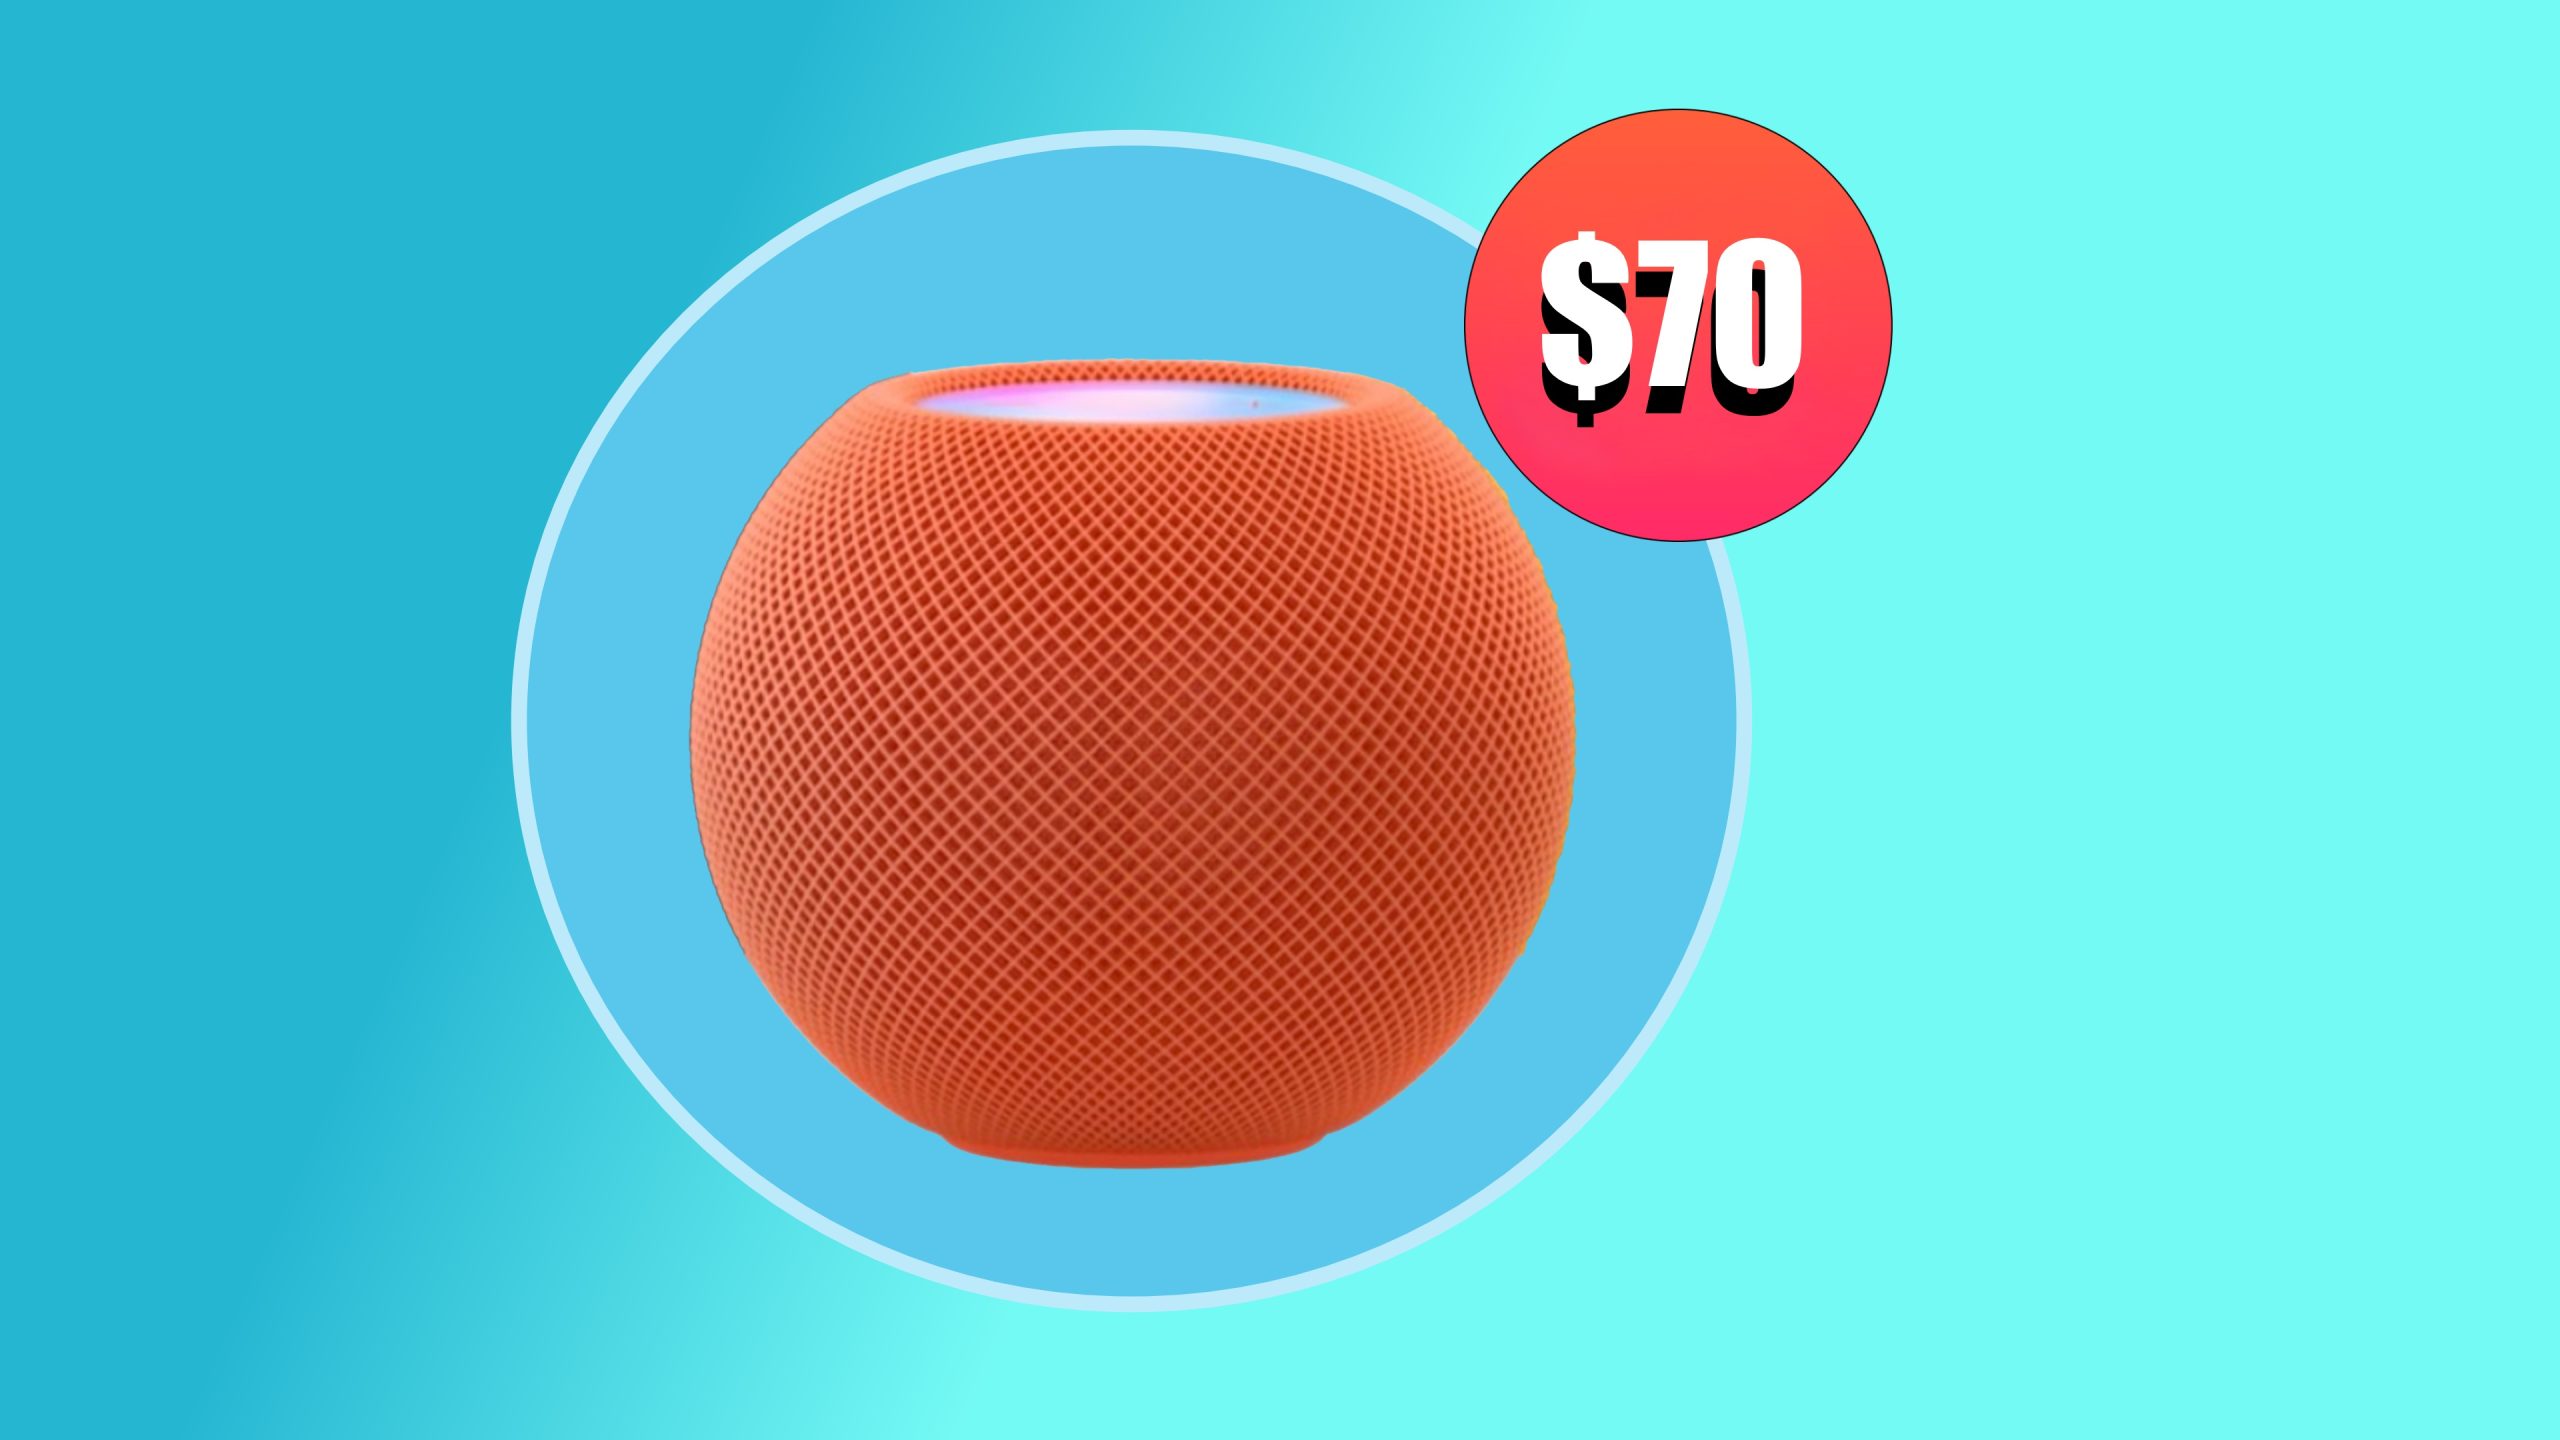 Get a brand new HomePod mini for just $70